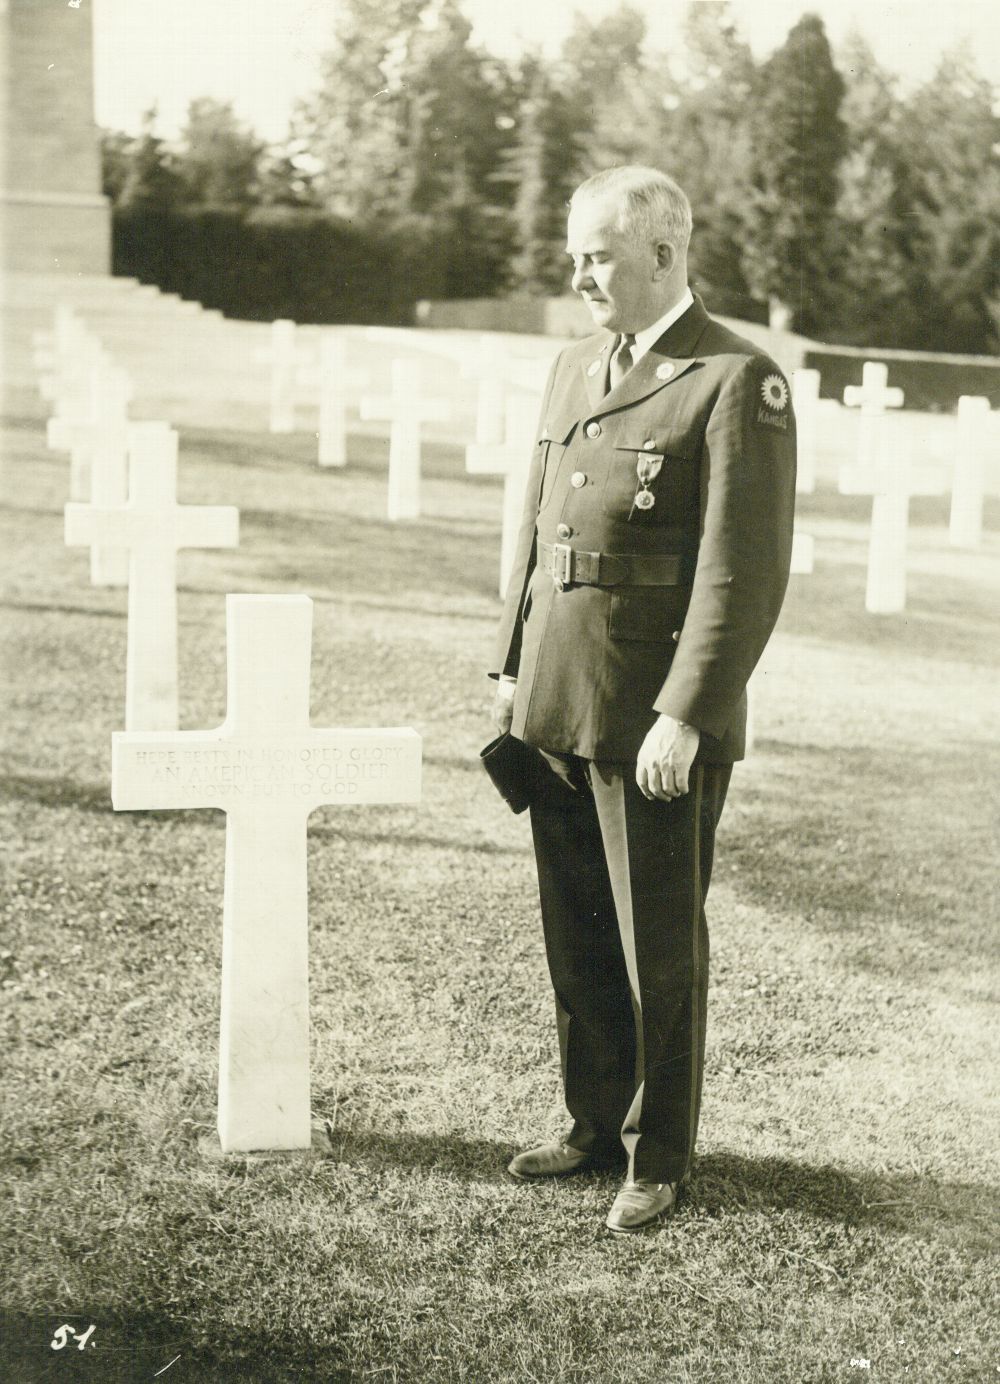 Harry Colmery during his time as National Commander of the American Legion in 1937, paying his respects to American dead at a World War I military cemetery in France. (Kansas Historical Society)